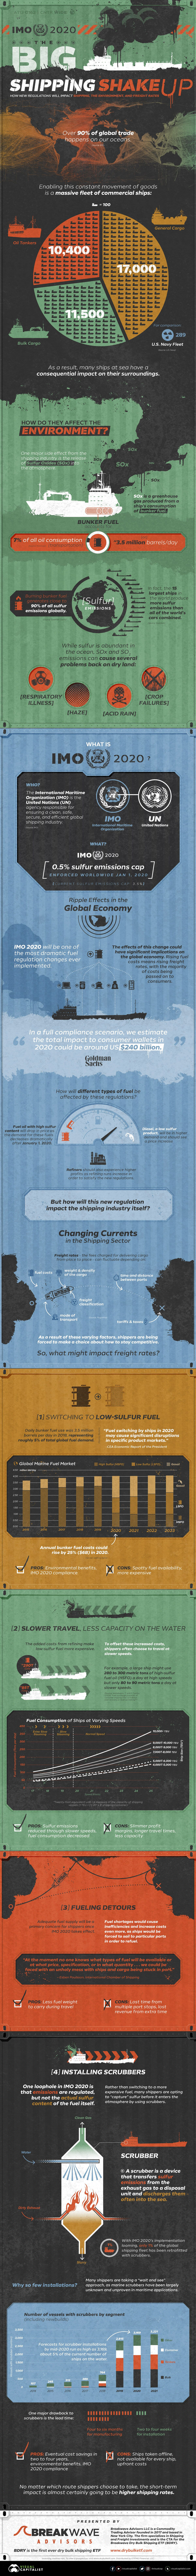 IMO 2020 shipping Infographic